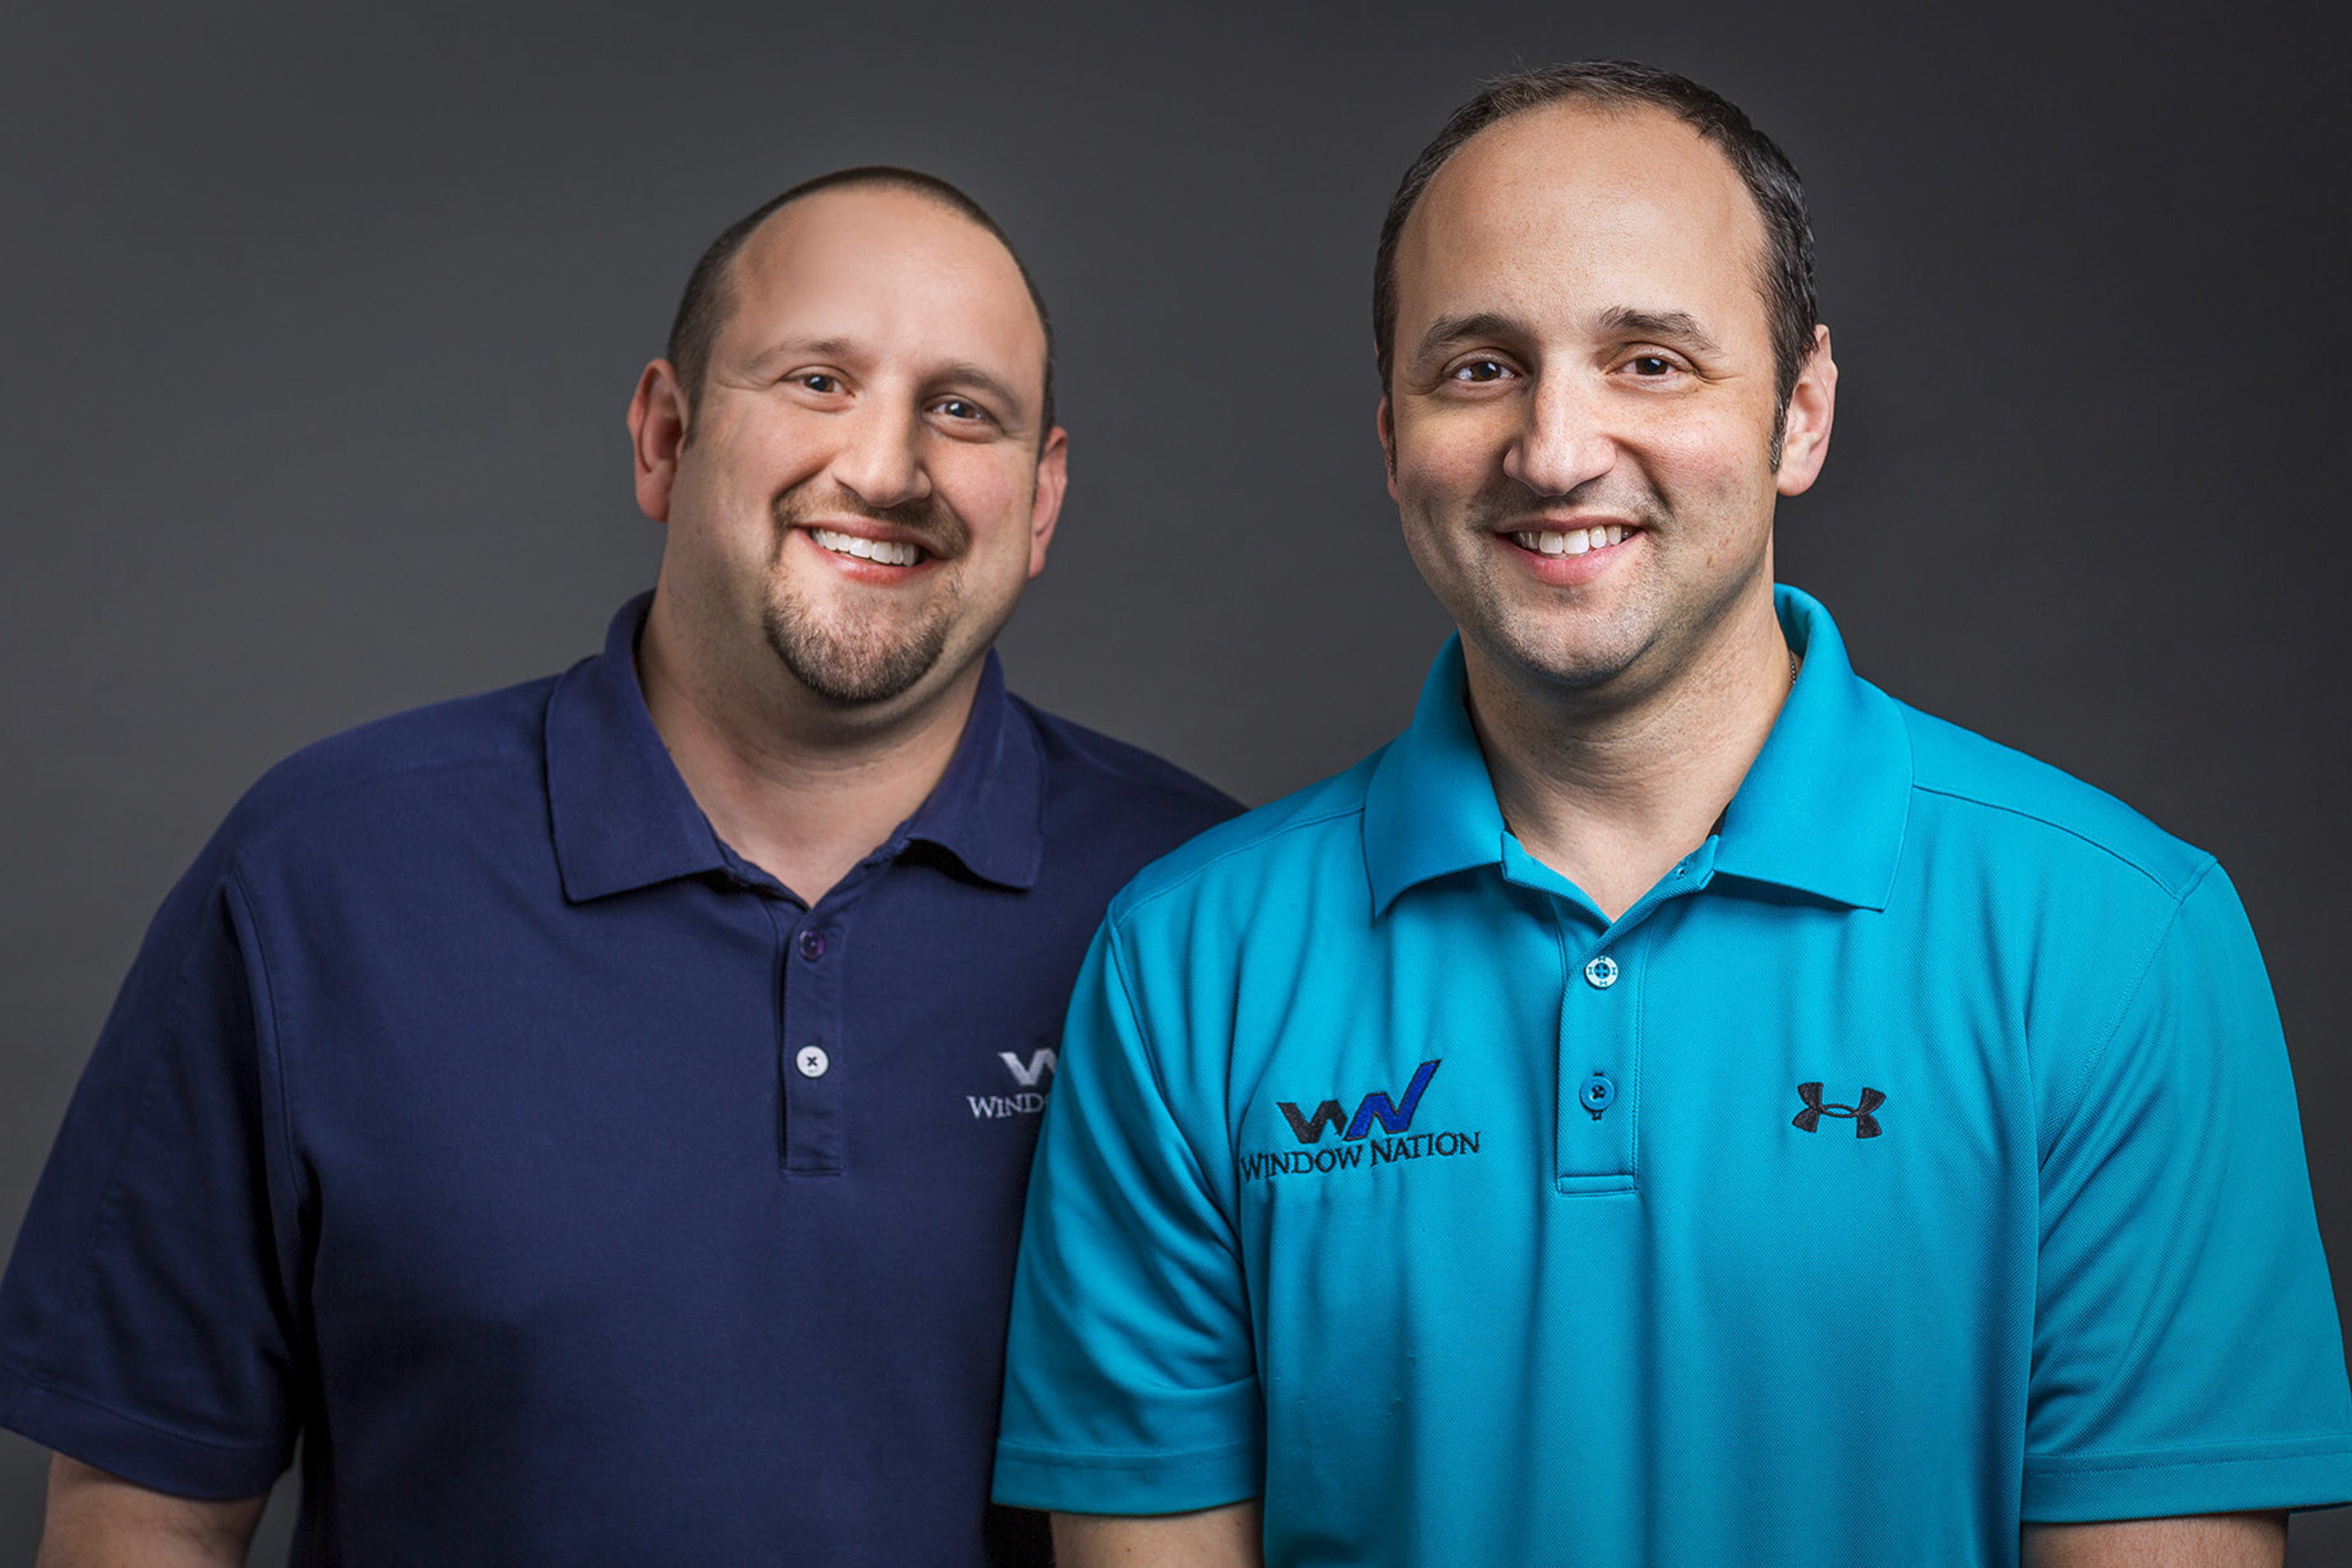 Third-generation window experts, brothers Aaron and Harley Magden credit their midwestern roots and customer-centric philosophy for growing to the 5th largest home improvement company in just 10 years.